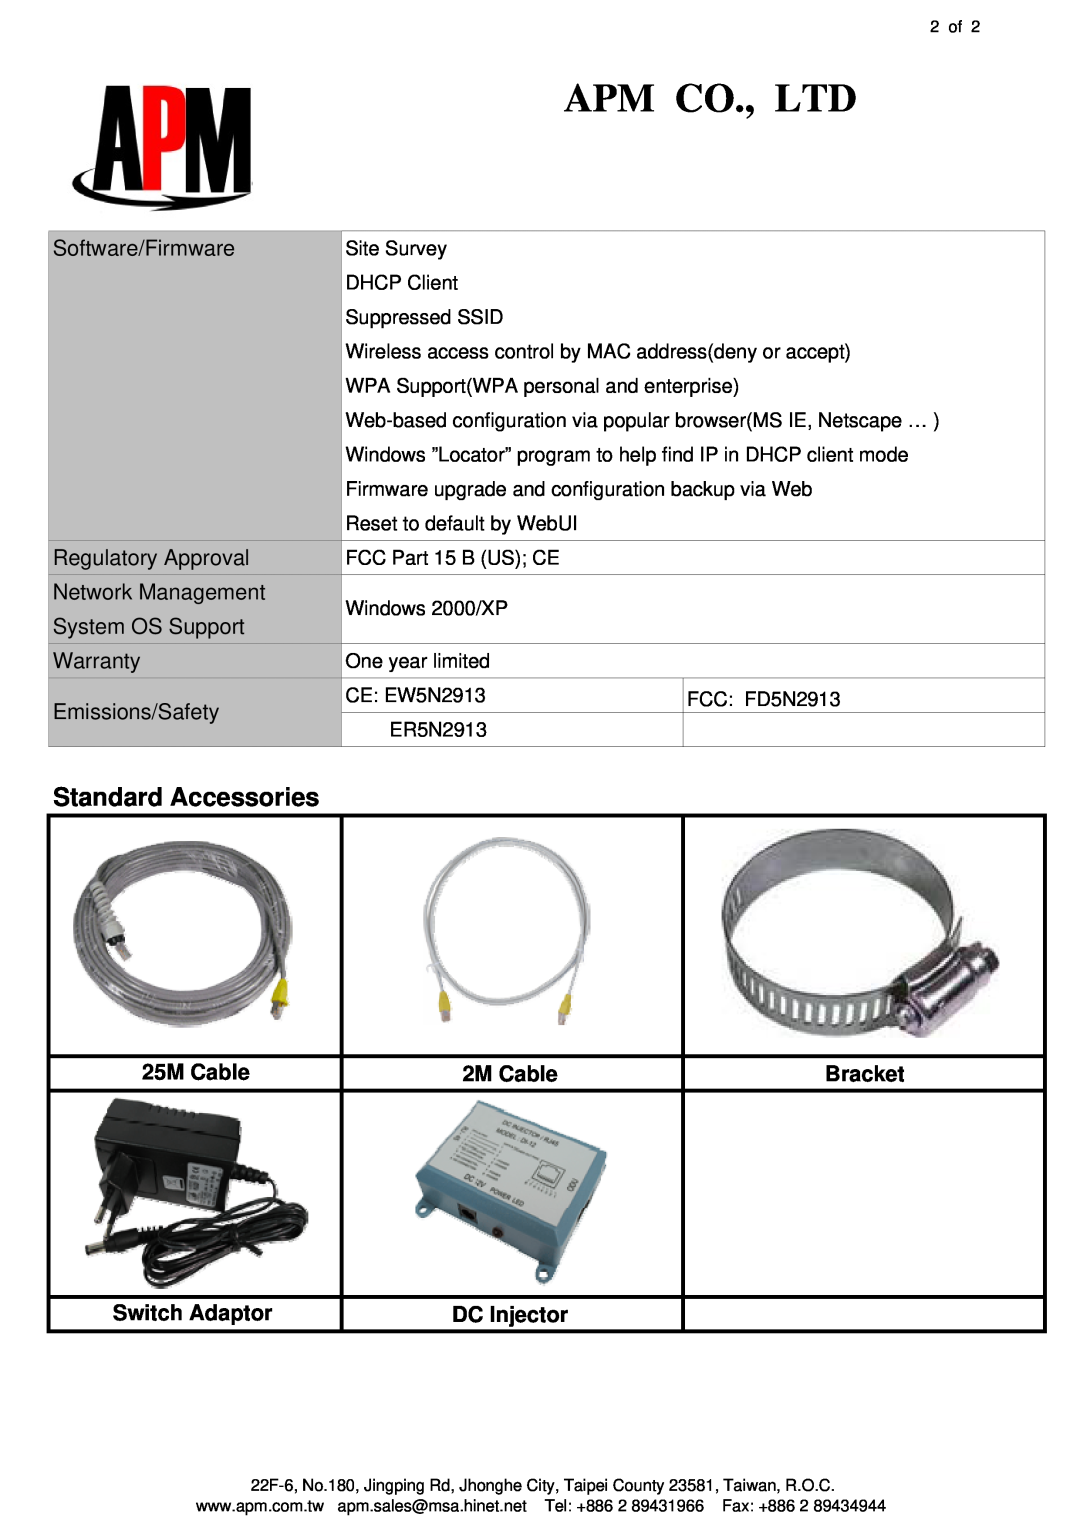 APM 24005G-1 manual Standard Accessories, 25M Cable, 2M Cable, Bracket, Switch Adaptor, DC Injector 